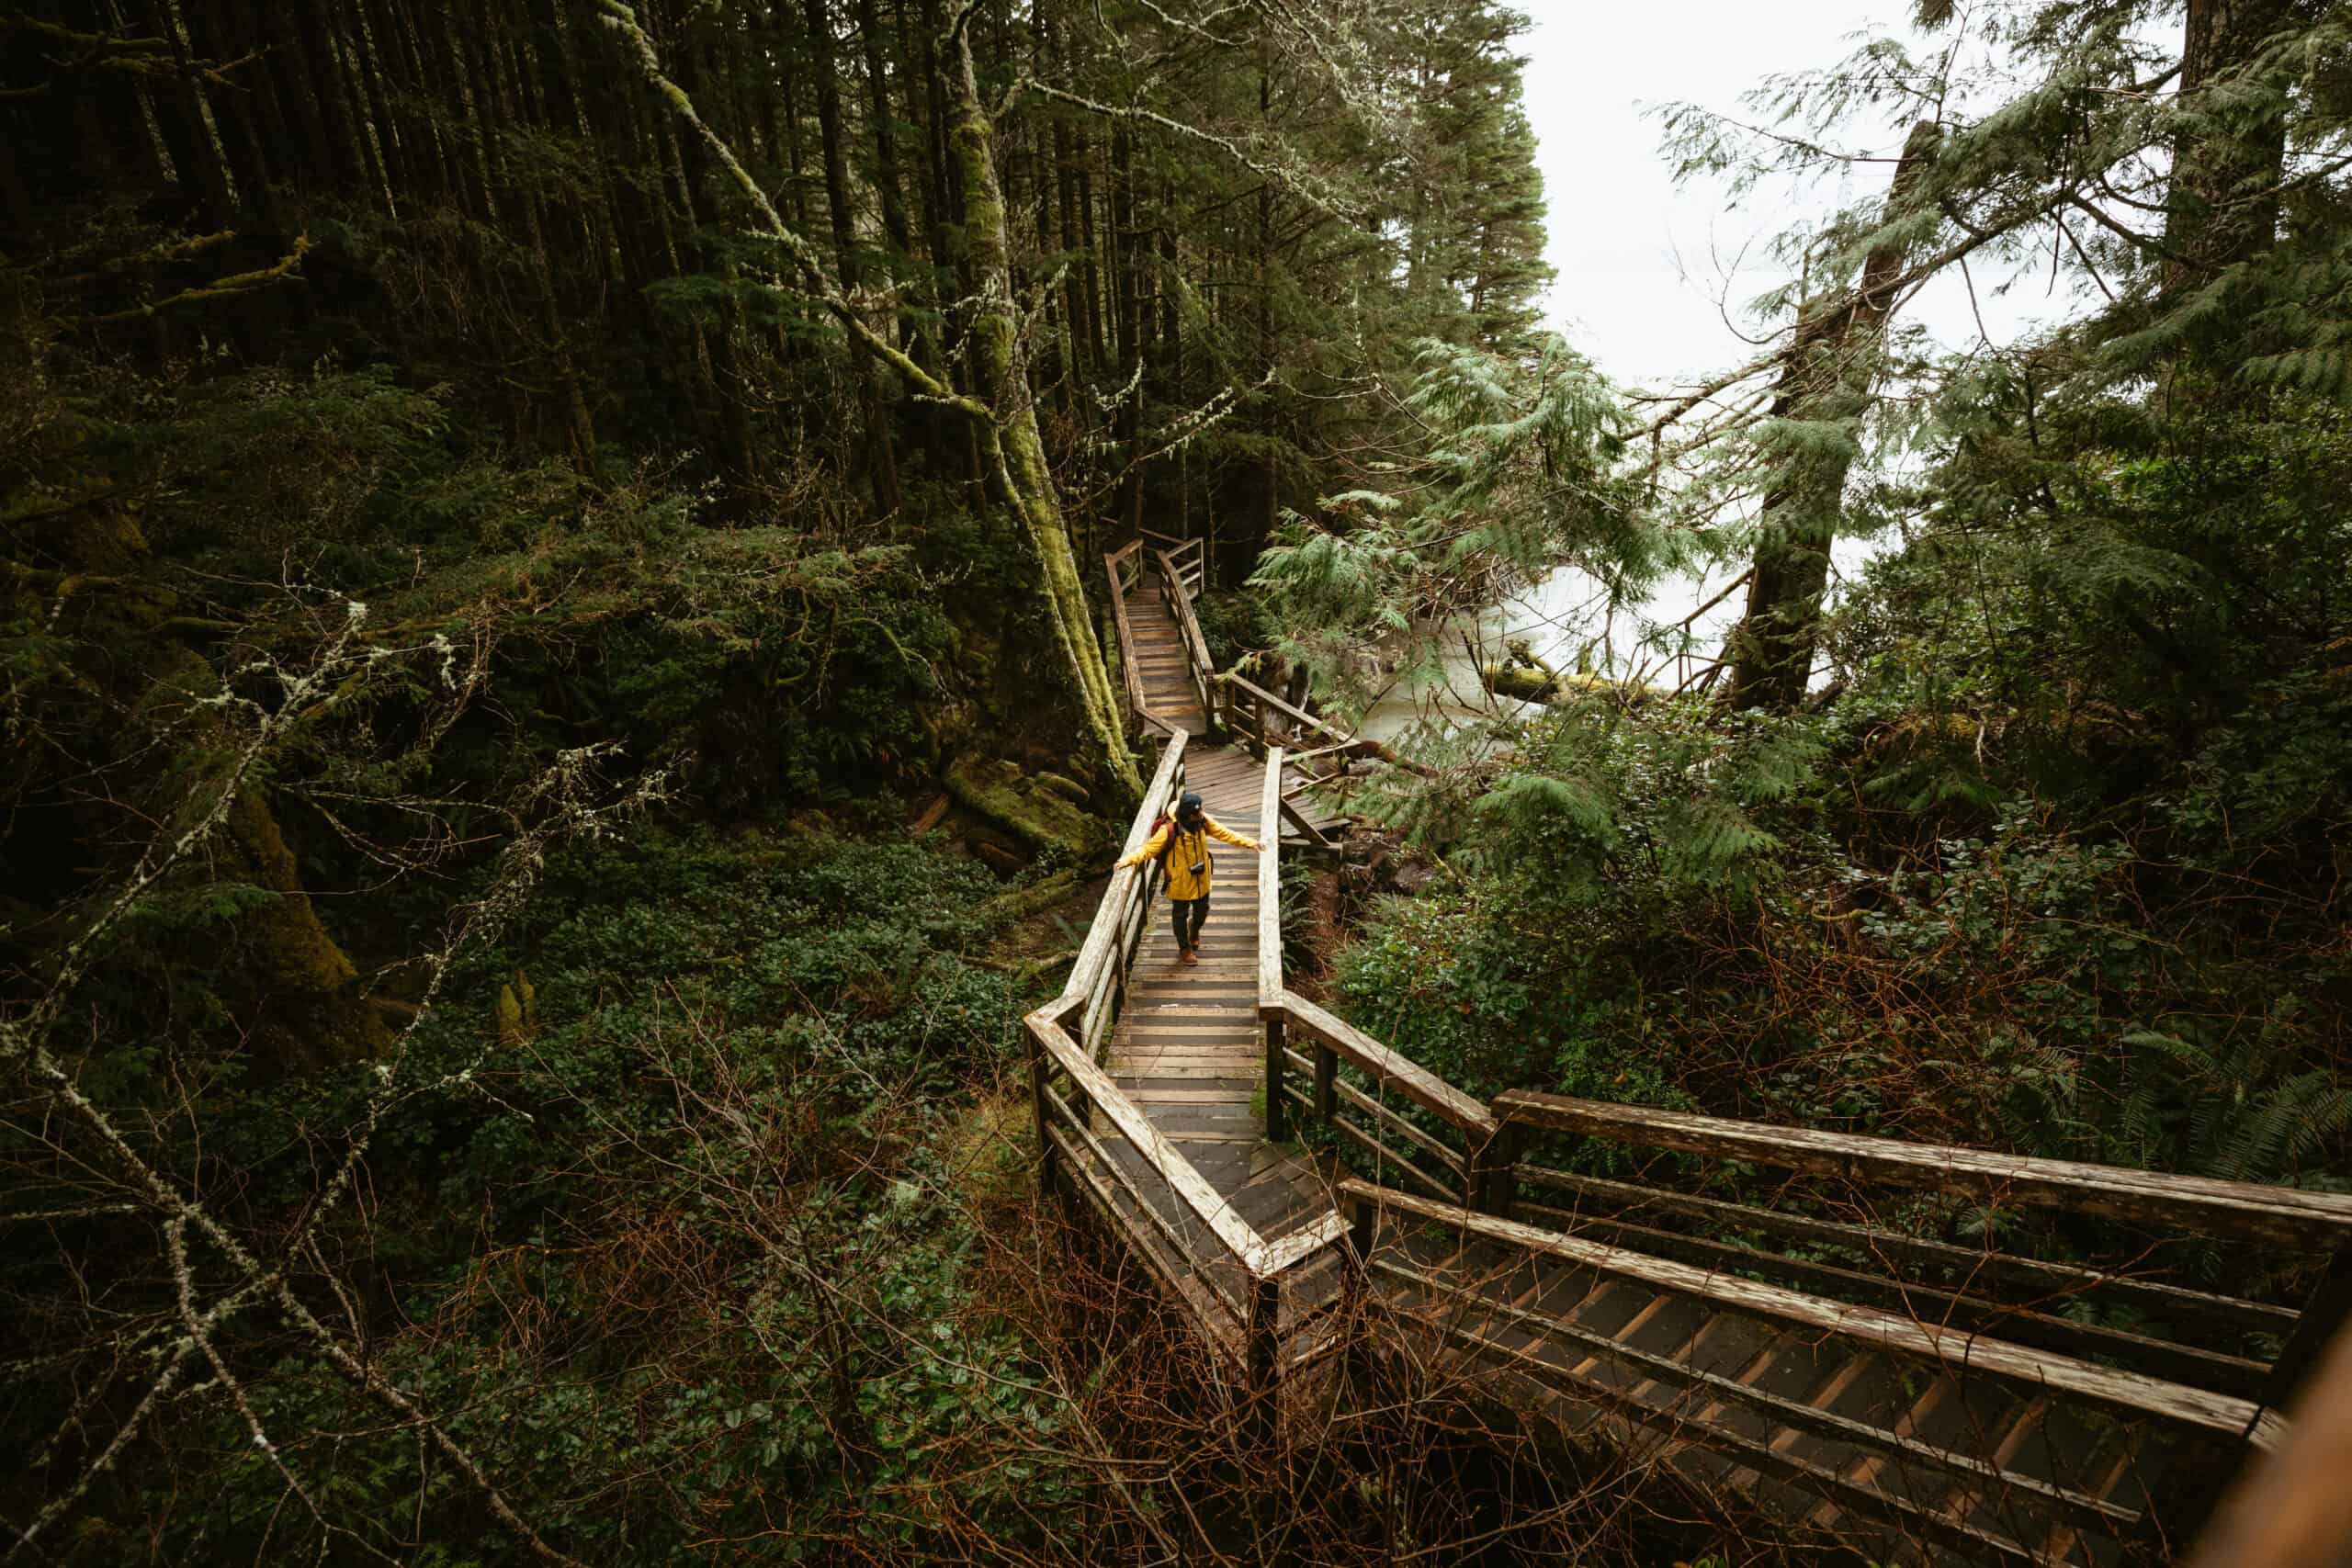 10+ Incredible Things To Do In Tofino, British Columbia You Need To Experience